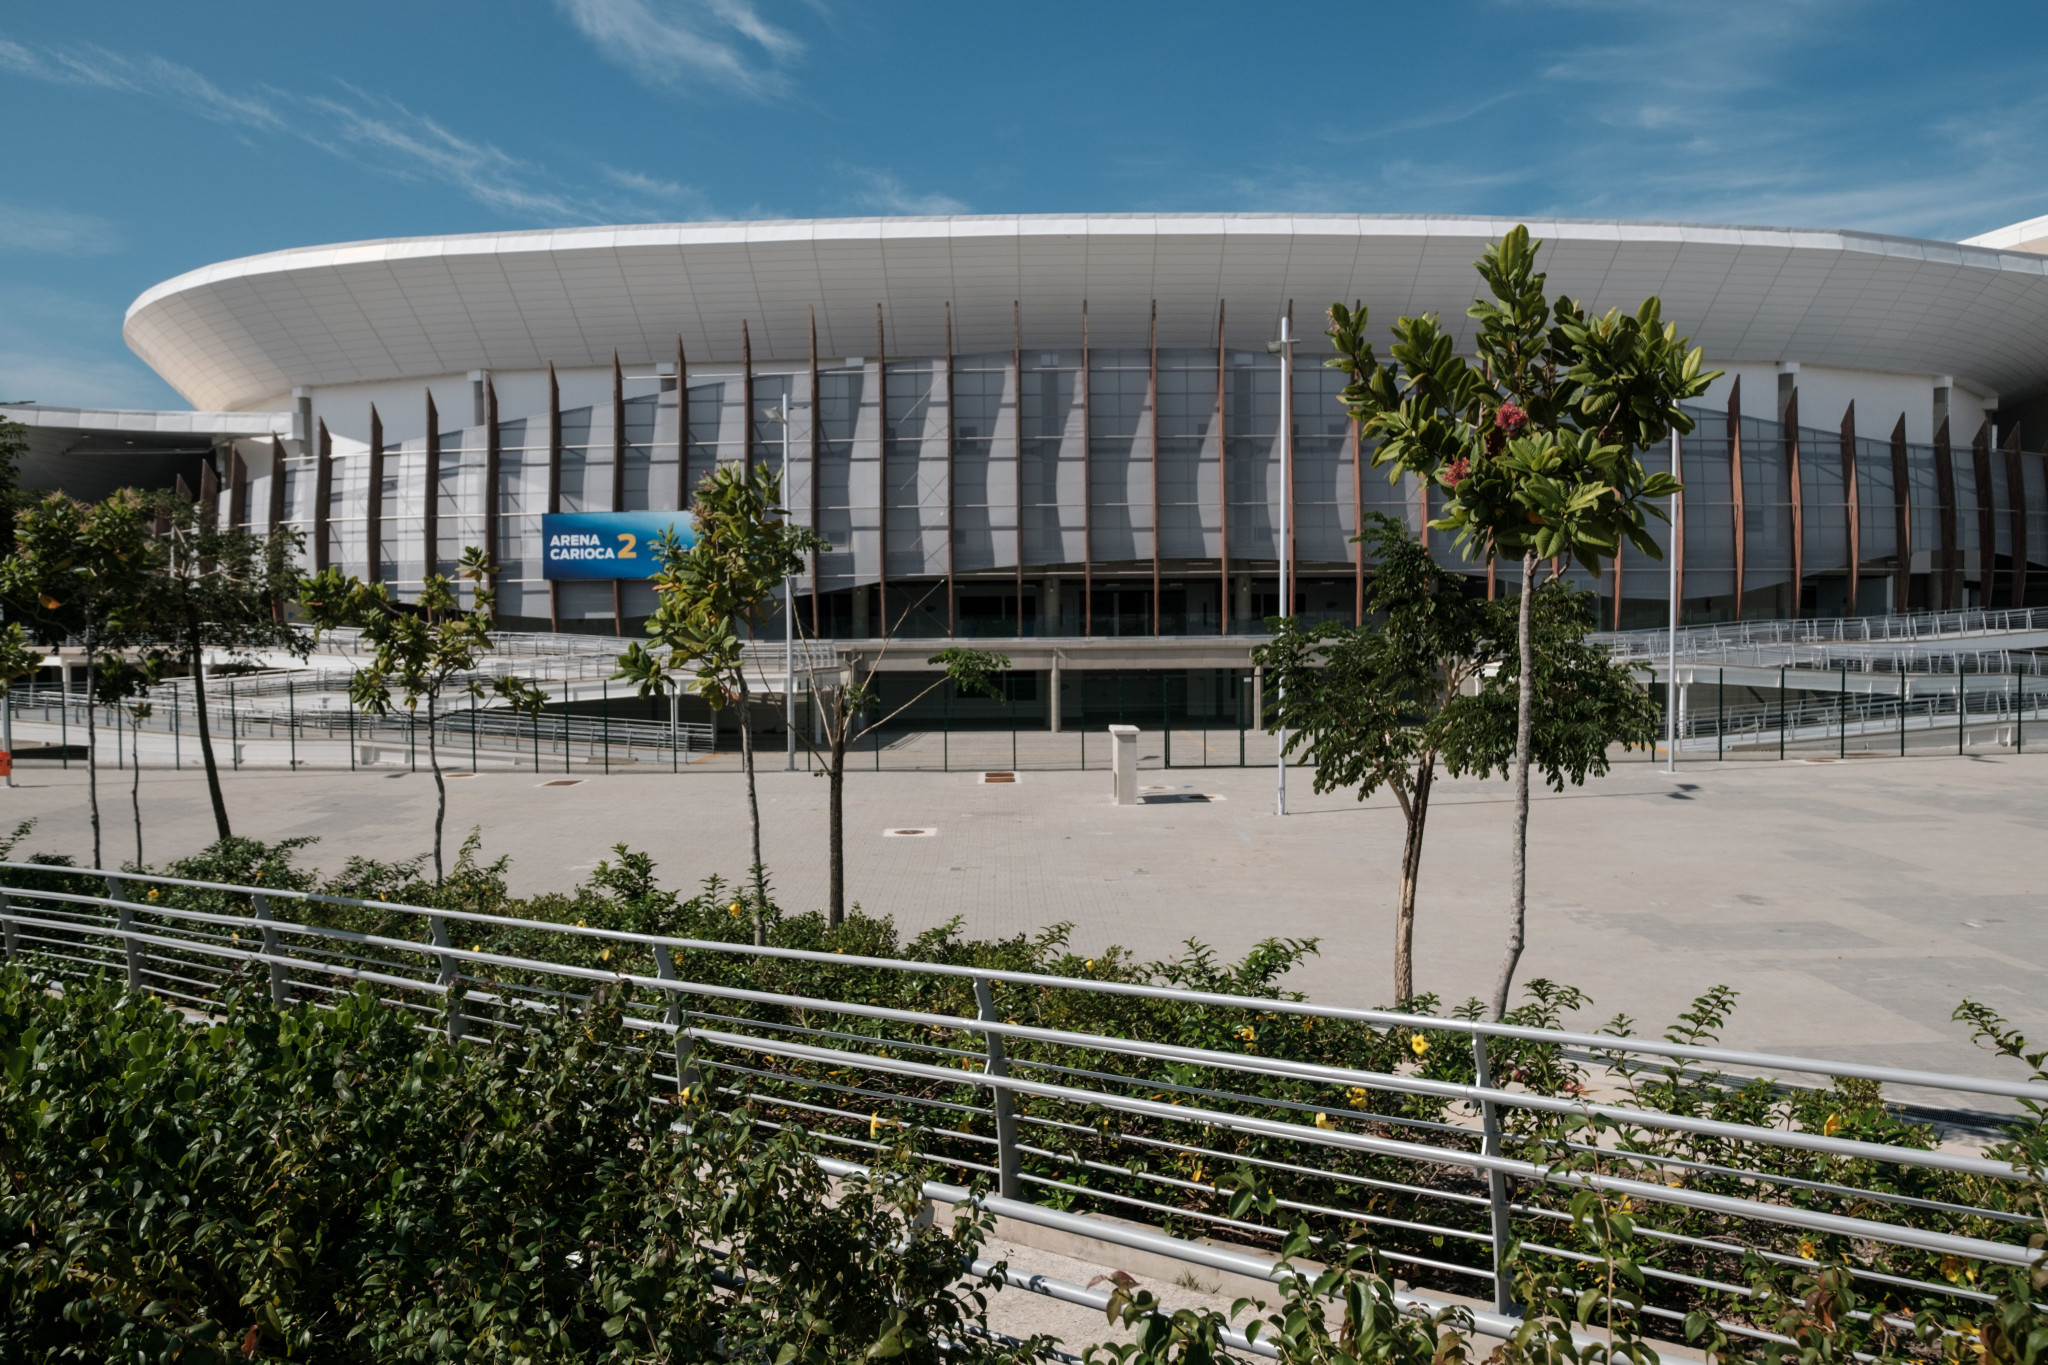 The Carioca Arena, venue for boccia during the Rio 2016 Paralympics, hosted competition at the World Championships ©Getty Images